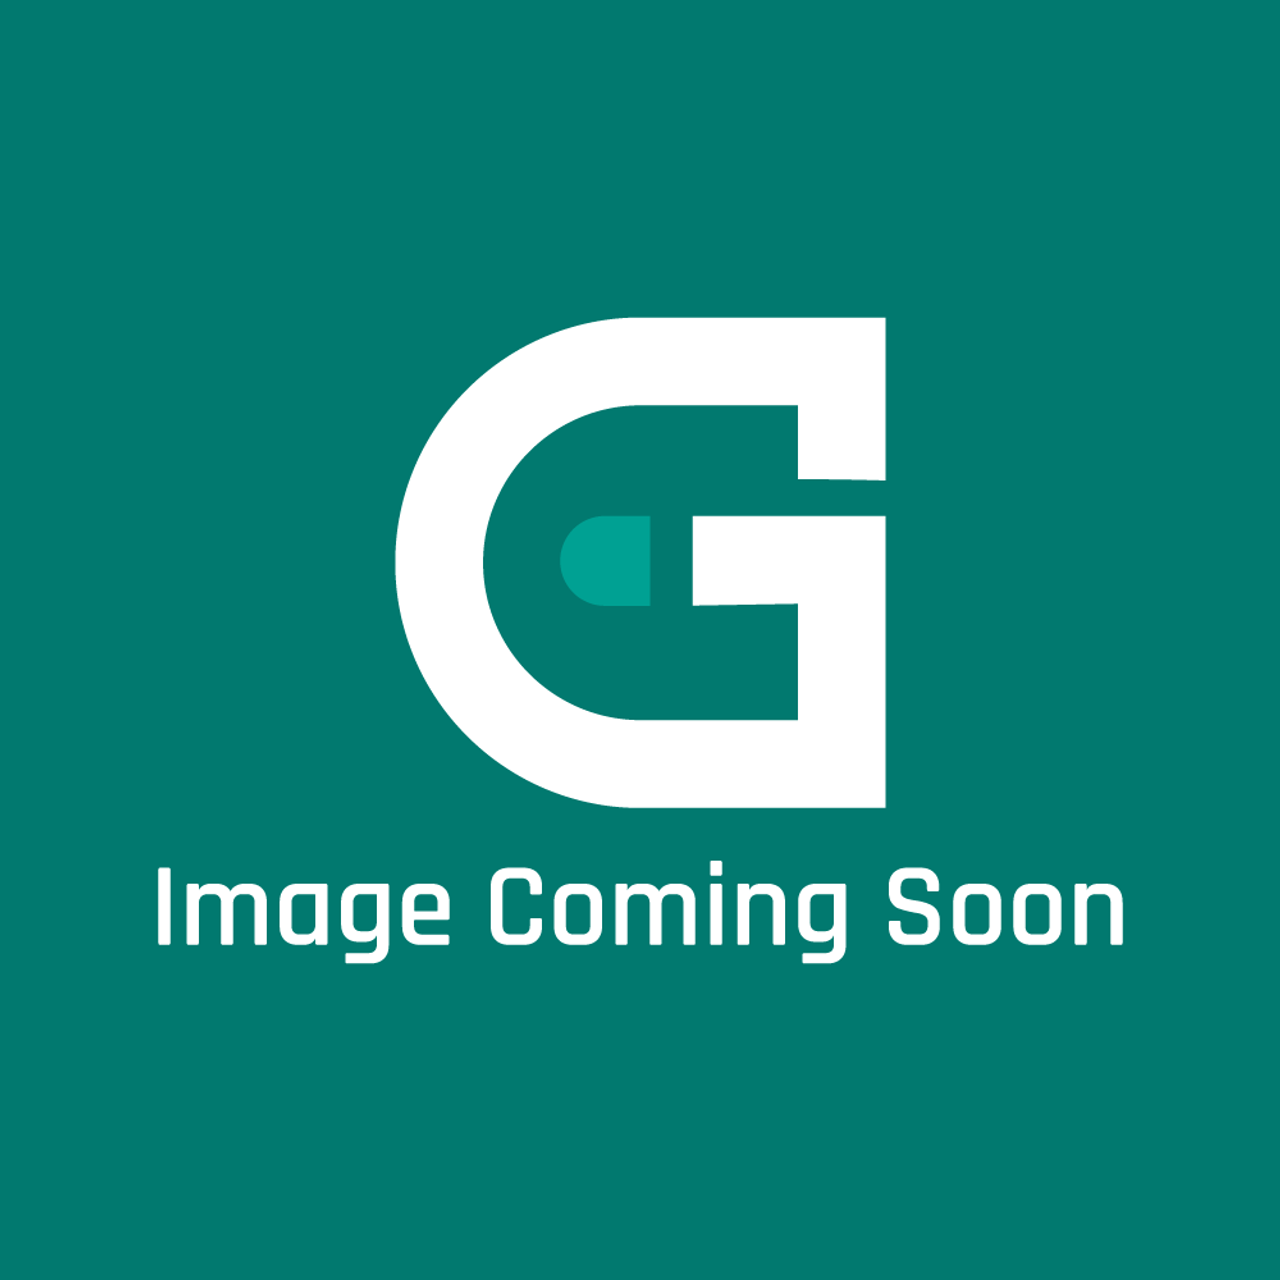 GE Appliances WR12X44272 - Flat Black Drawer Handle - Image Coming Soon!